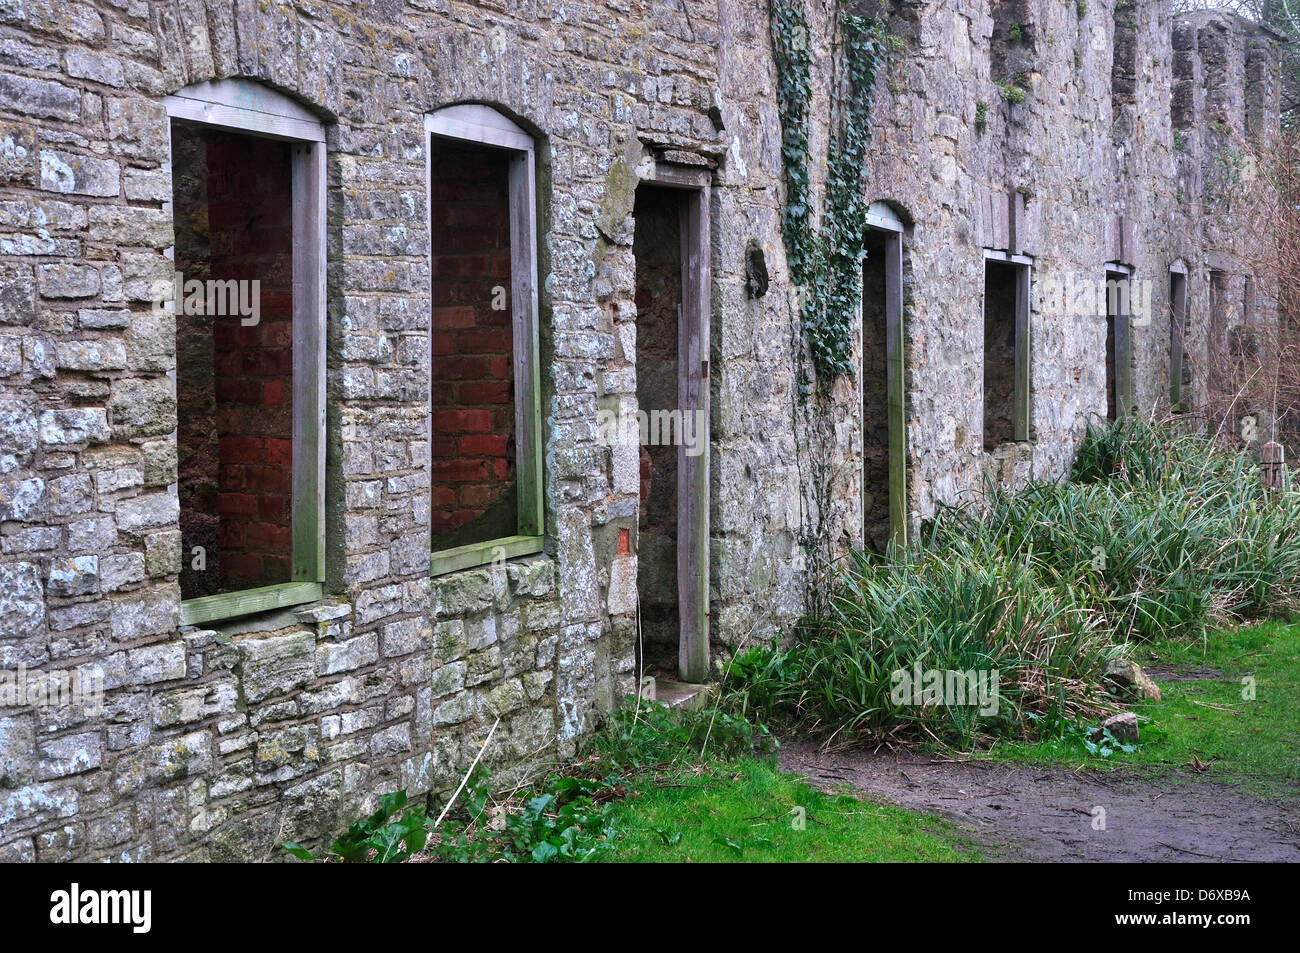 A view of some deserted and ruined cottages at Tyneham village, Dorset Stock Photo